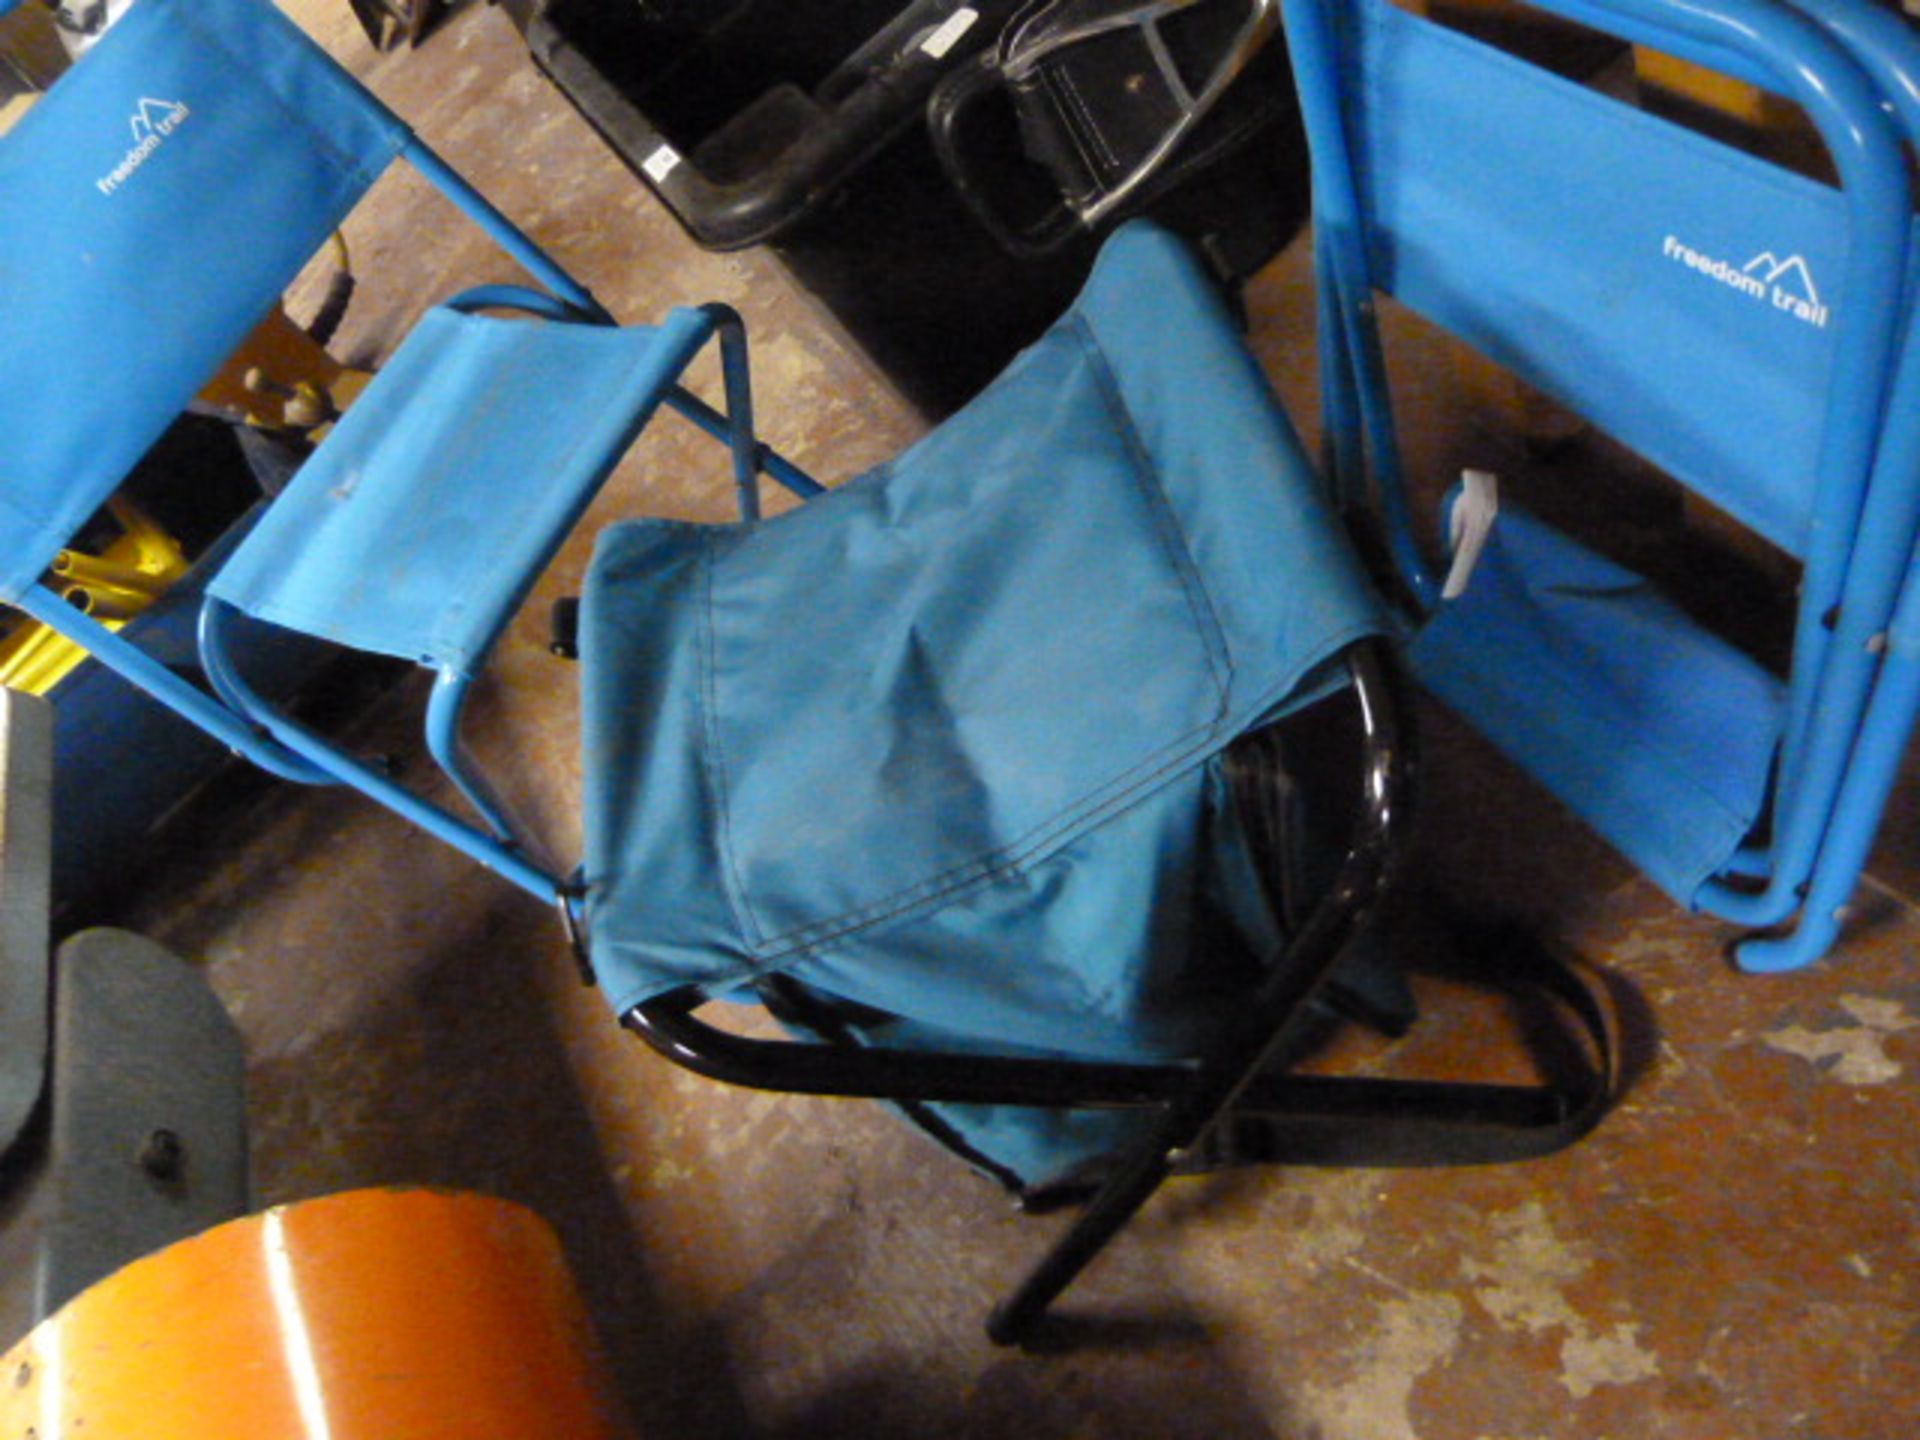 Two Small Folding Chairs and a Folding Storage Bag